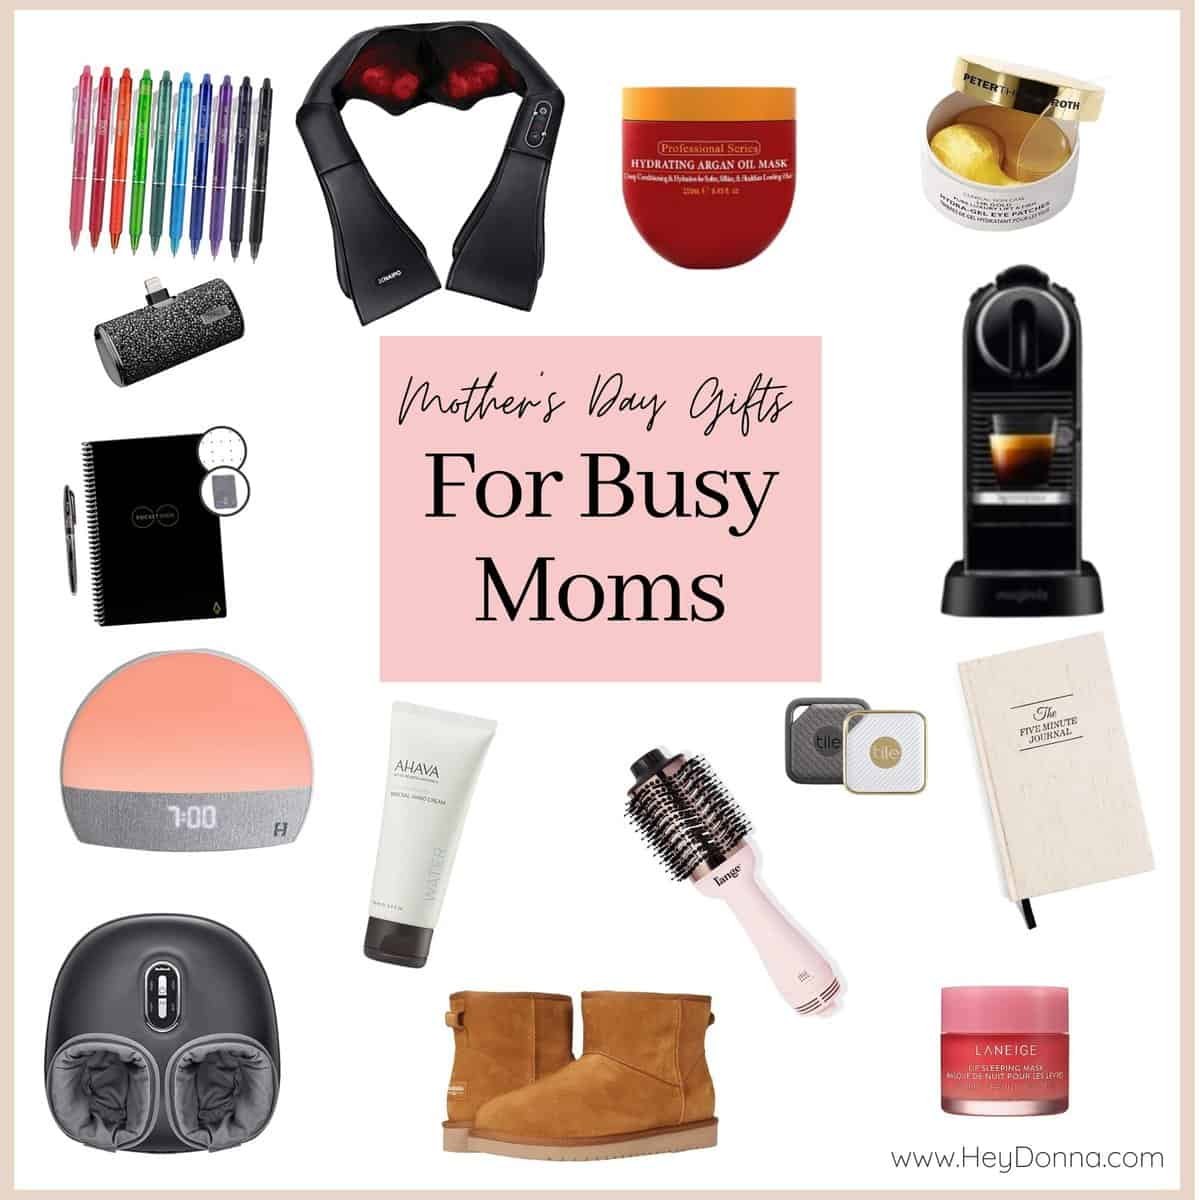 22 Thoughtful Mother's Day Gifts For Under $20 | CafeMom.com